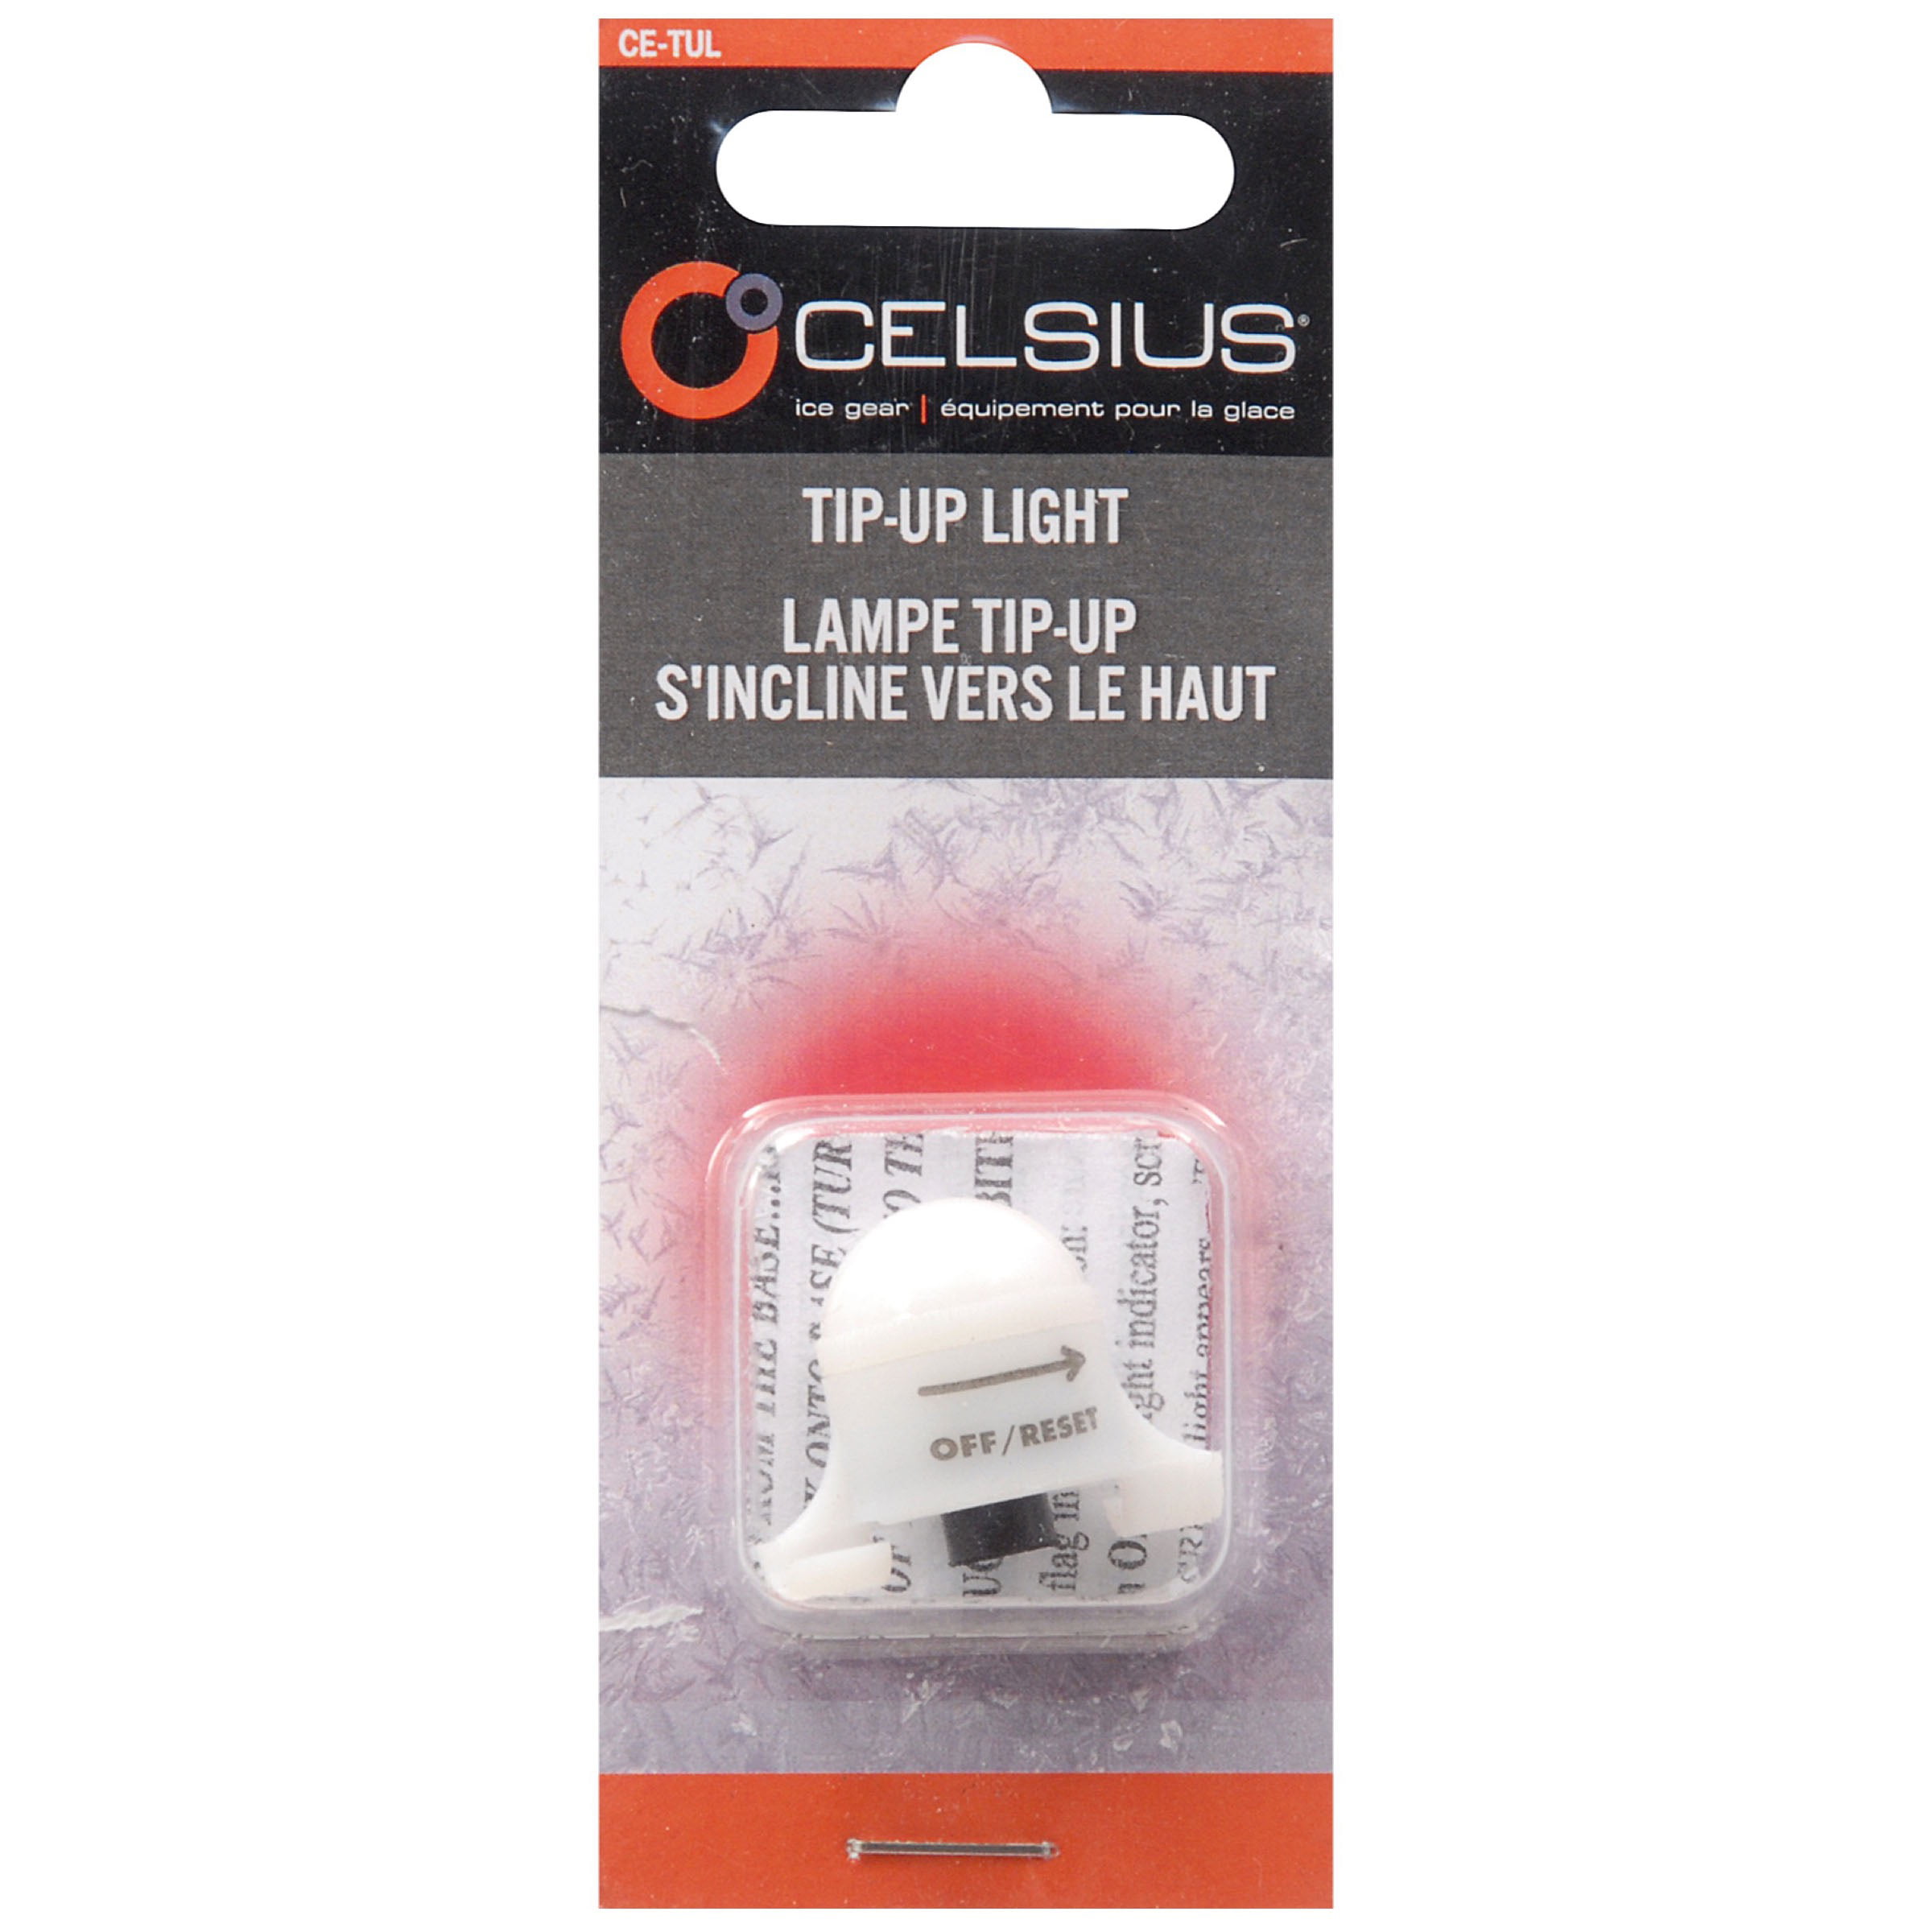 Celsius Tip-up Light Ice Fishing Sports & Outdoor Equipment - Qty